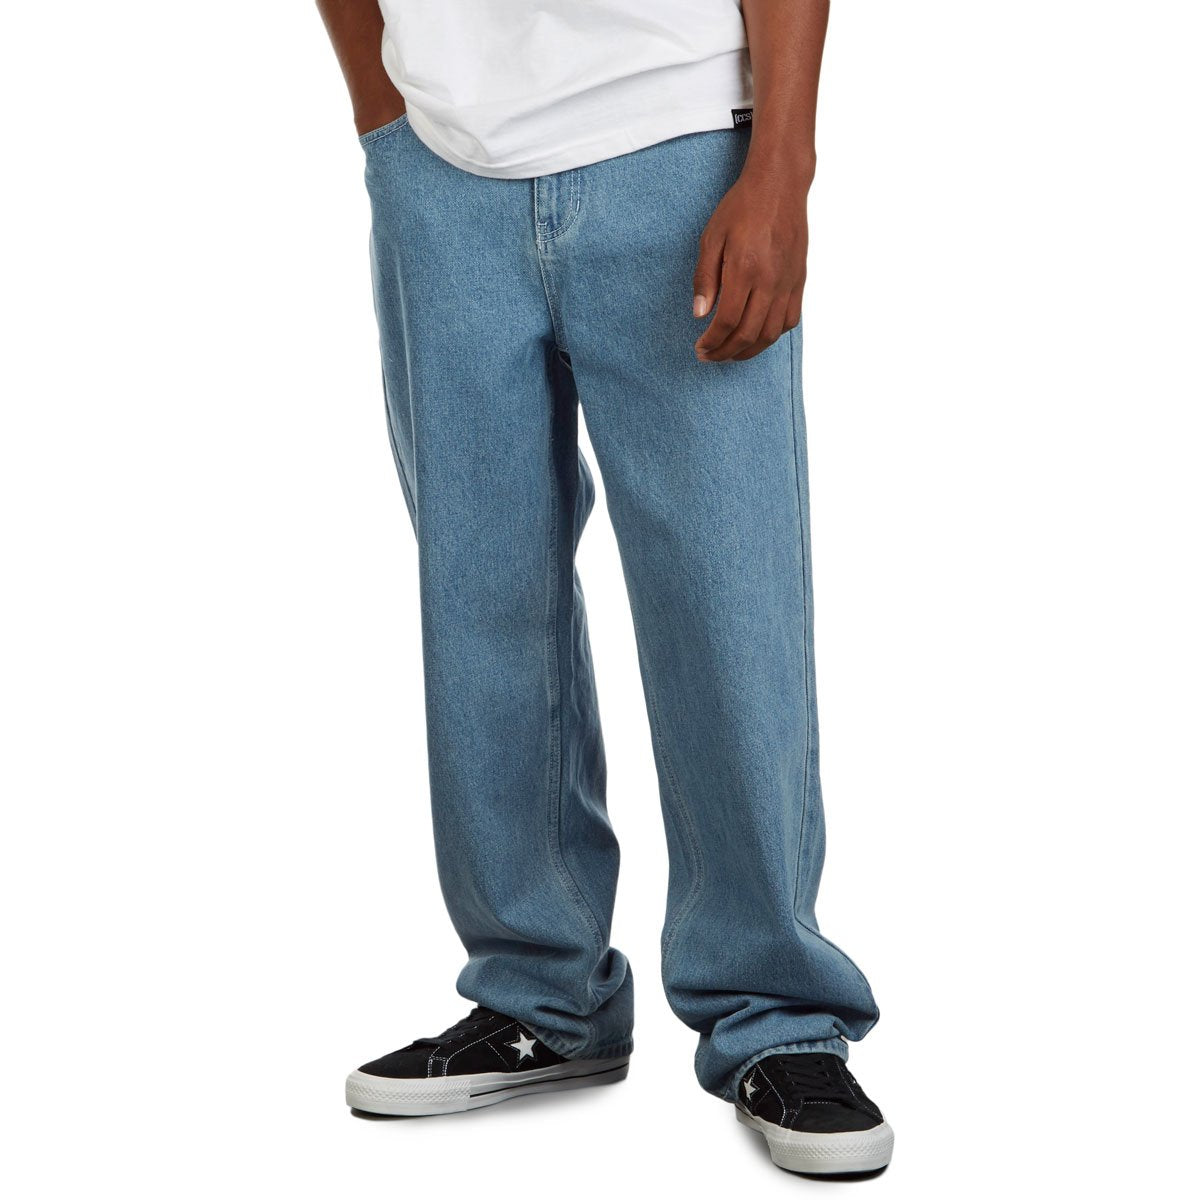 CCS Original Relaxed Denim Jeans - Rinsed Blue image 2